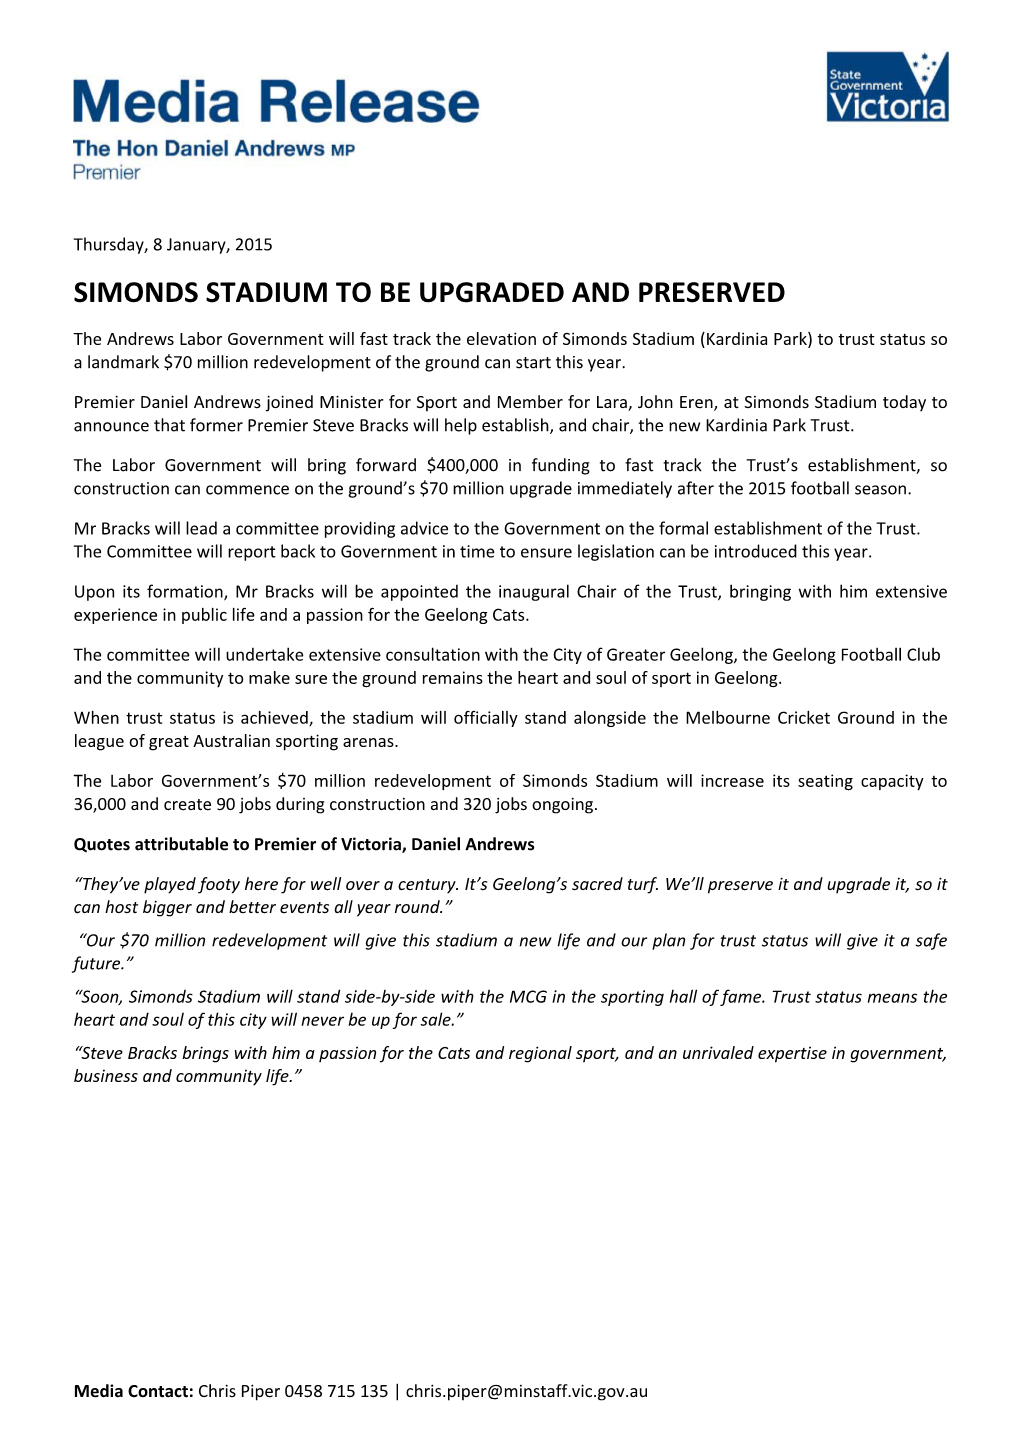 Simonds Stadium to Be Upgraded and Preserved